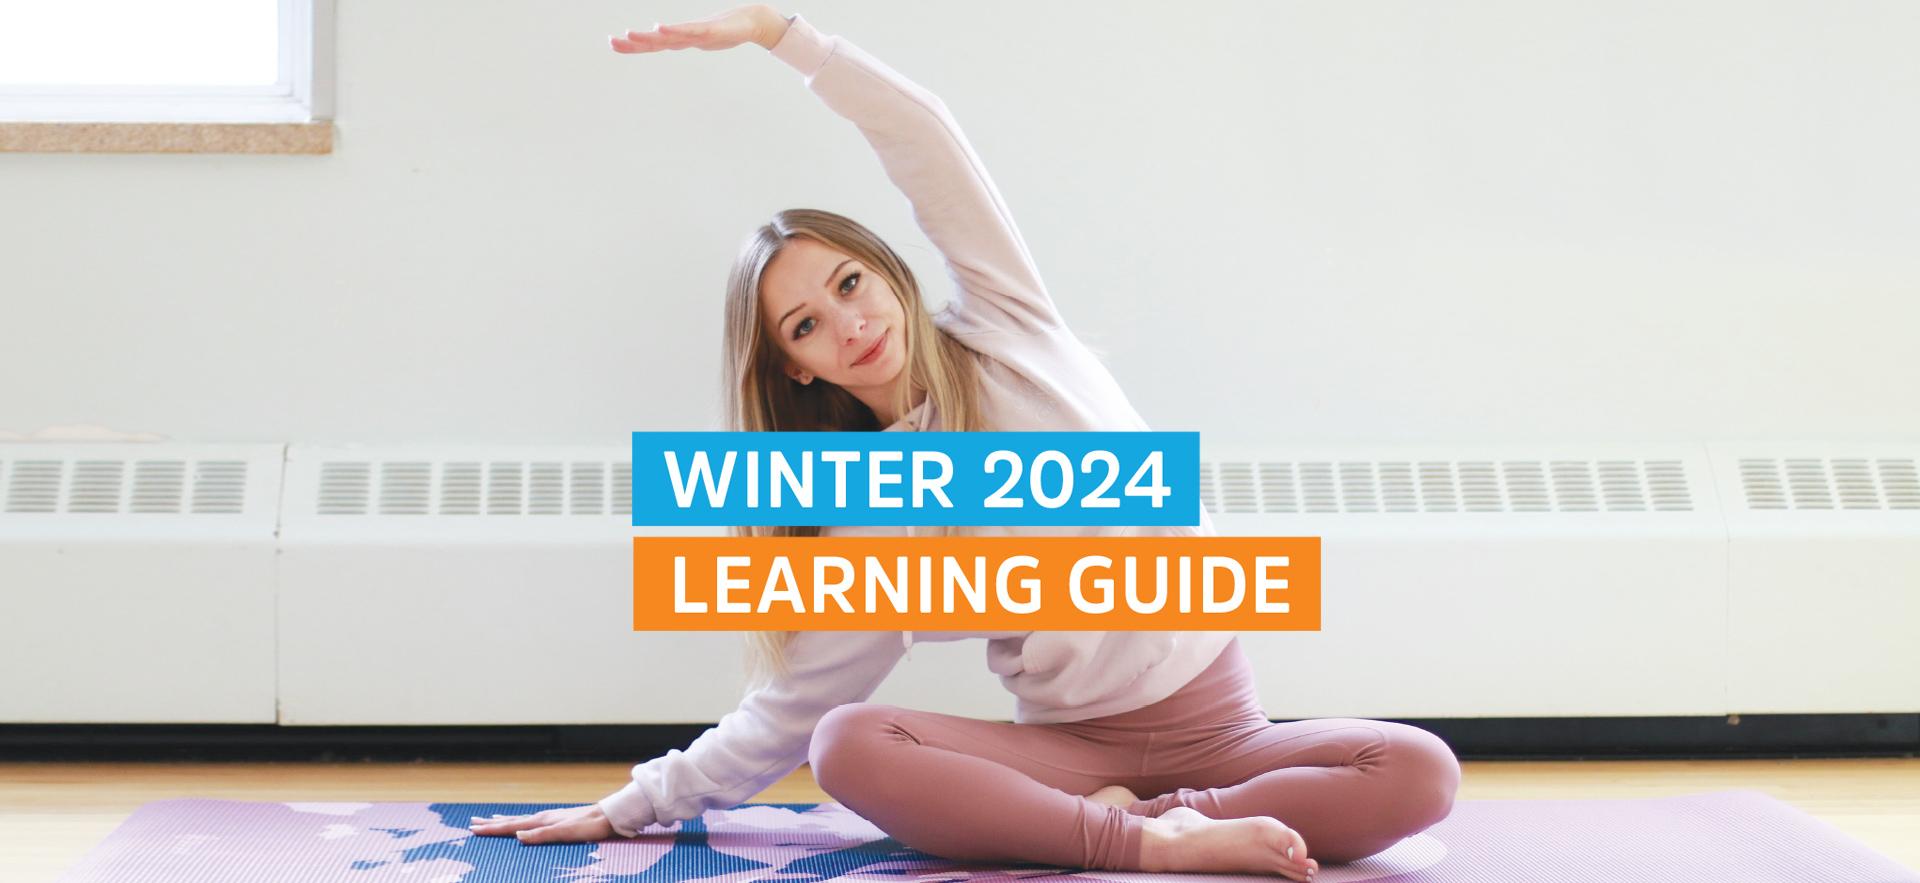 Winter 2024 Continuing Education Learning Guide with female doing yoga